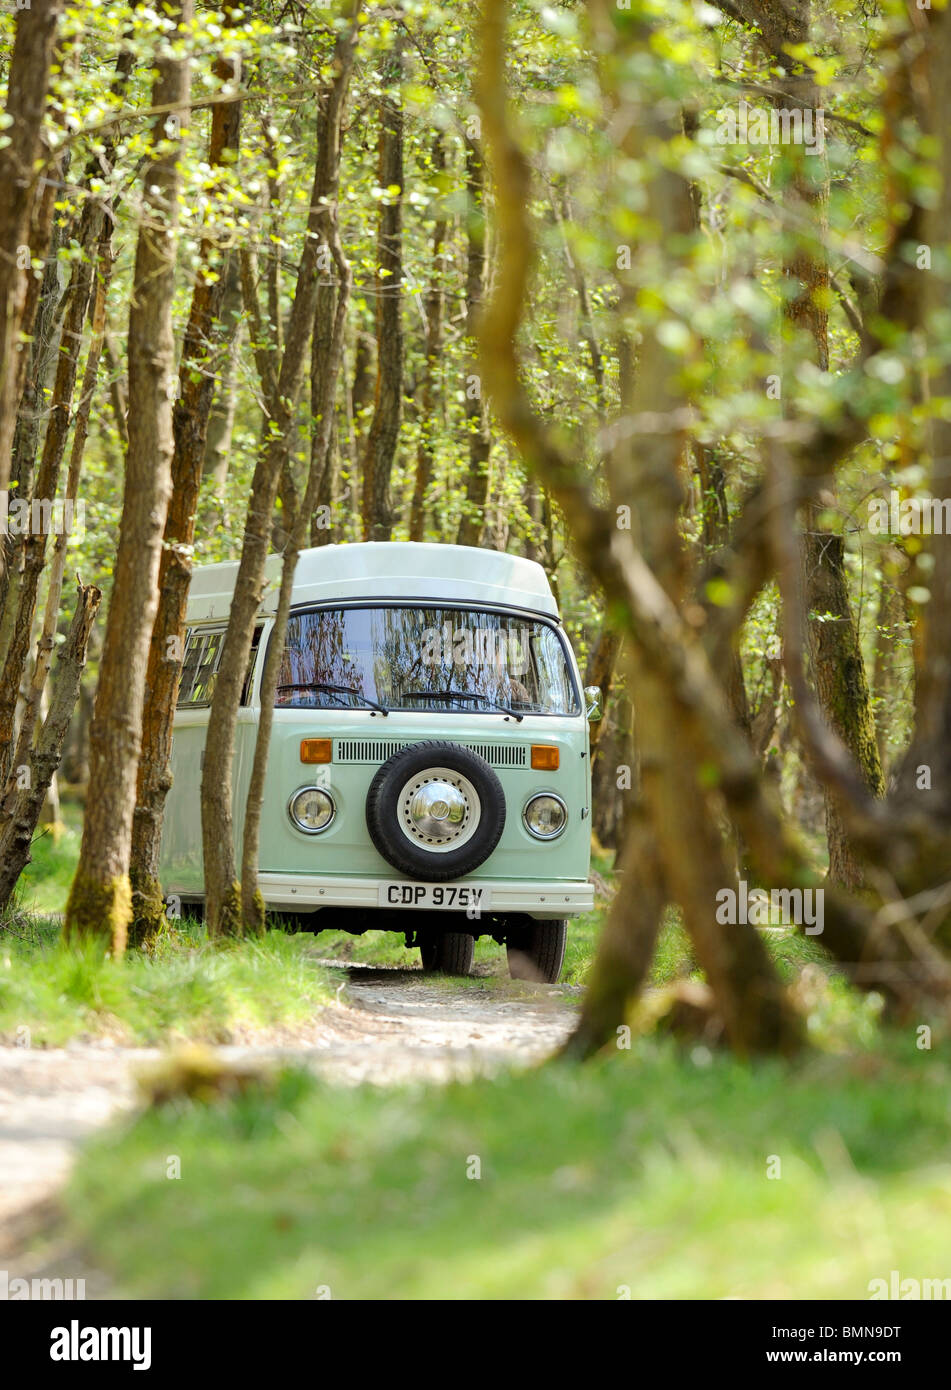 A young couple enjoying a camping holiday in a classic VW campervan. Stock Photo